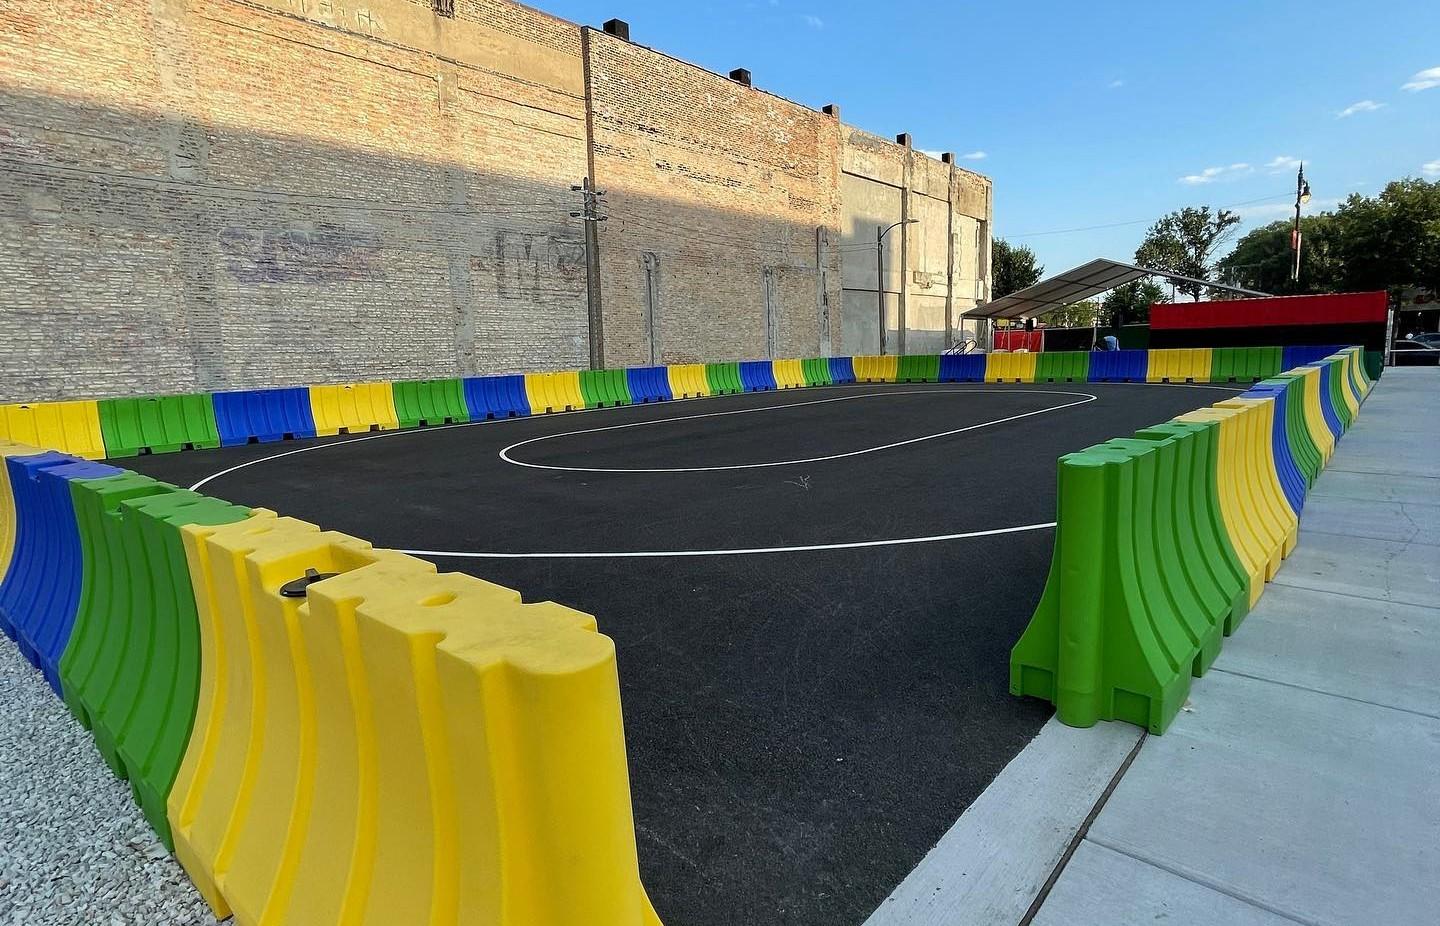 The Garfield Park Rite to Wellness Collaborative transformed a vacant lot at Pulaski Road and Madison Street in to an outdoor roller rink last summer. (Rite to Wellness / Facebook)